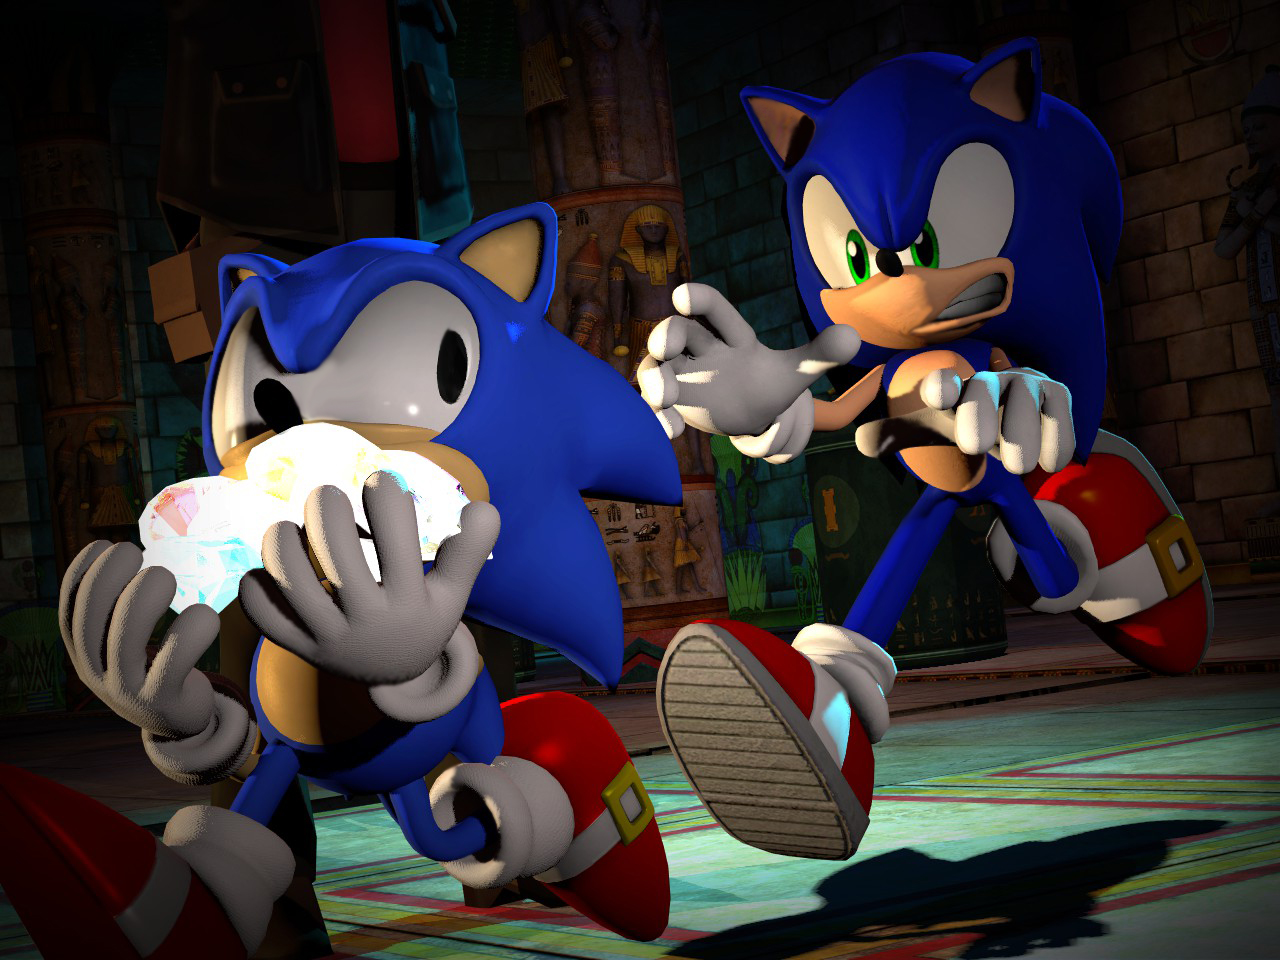 strp/super_sonic_and_his_friends_and_rivals_by_9029561_d6qqqa5-fullview.jpg...